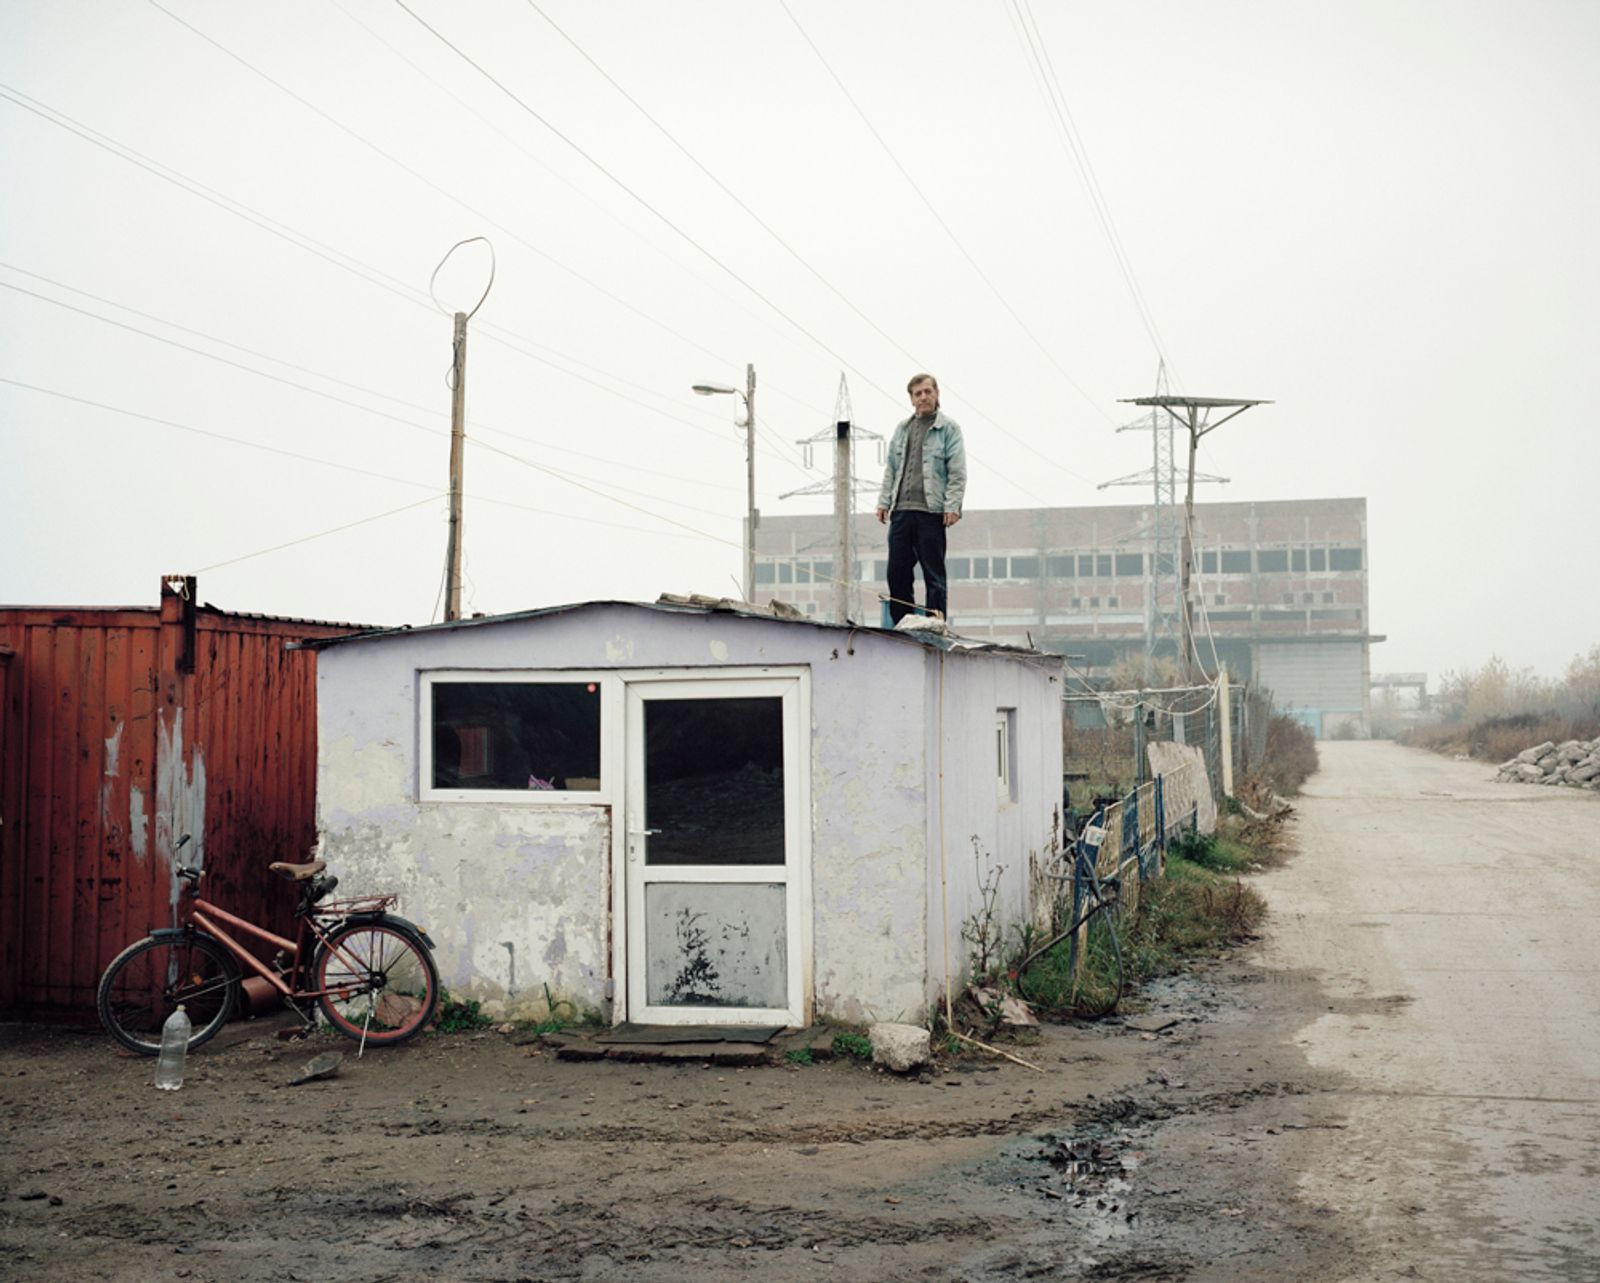 © Tommaso Rada - Romania, Giurgiu. A man working as security guard stand on a barrack in front of an abandoned factory that he watch.